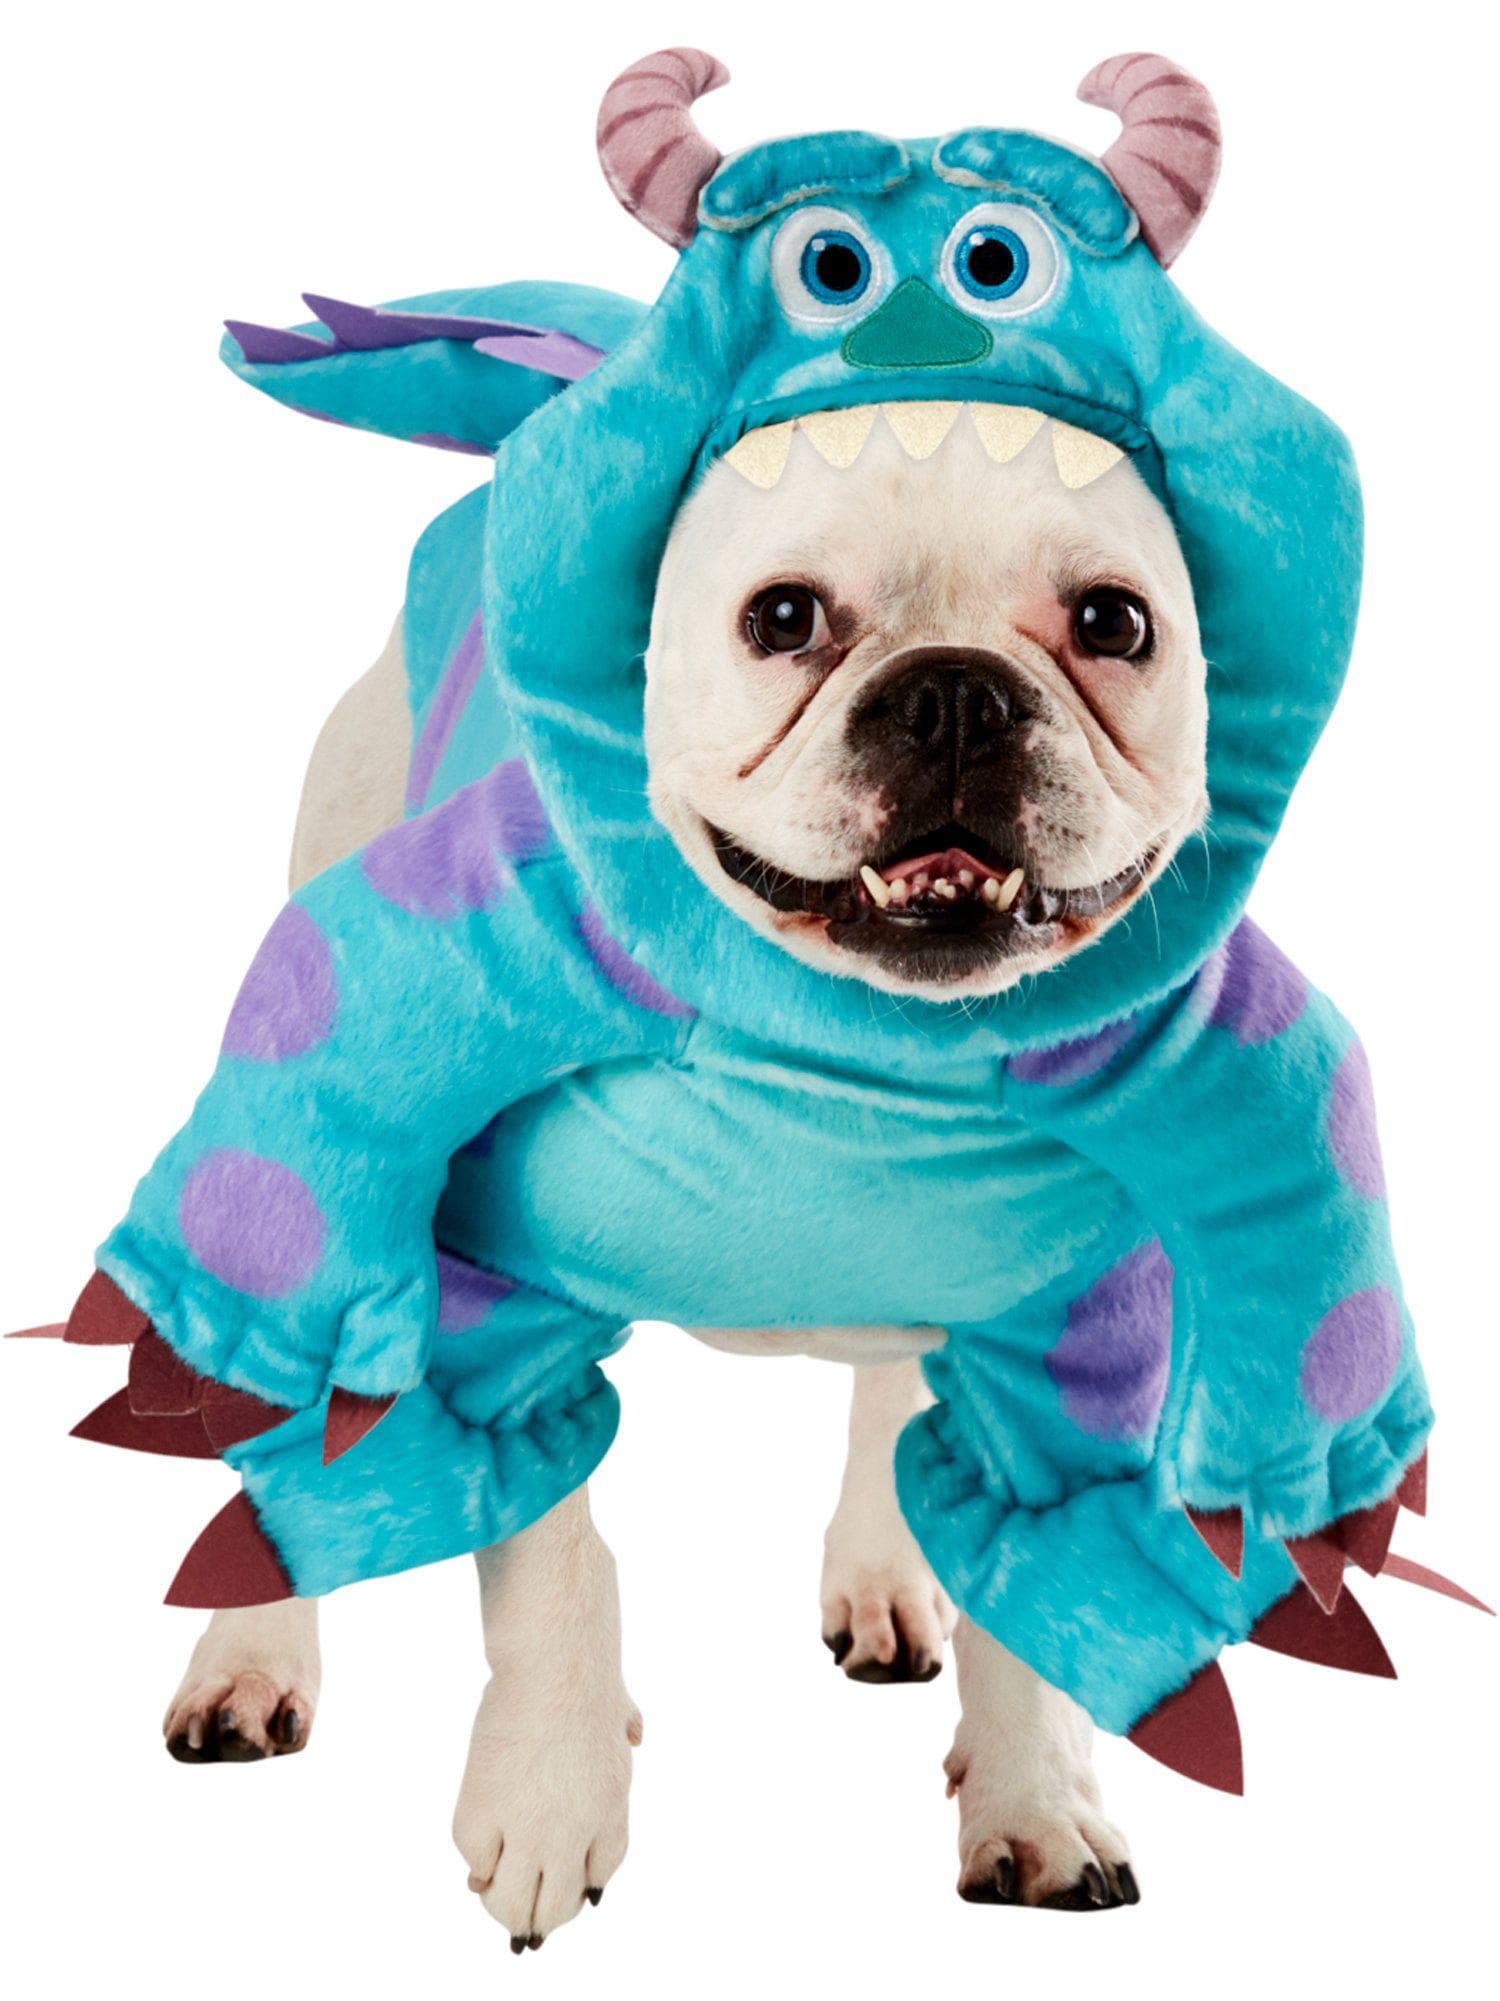 Monsters Inc. Sulley Walking Pet Costume - costumes.com